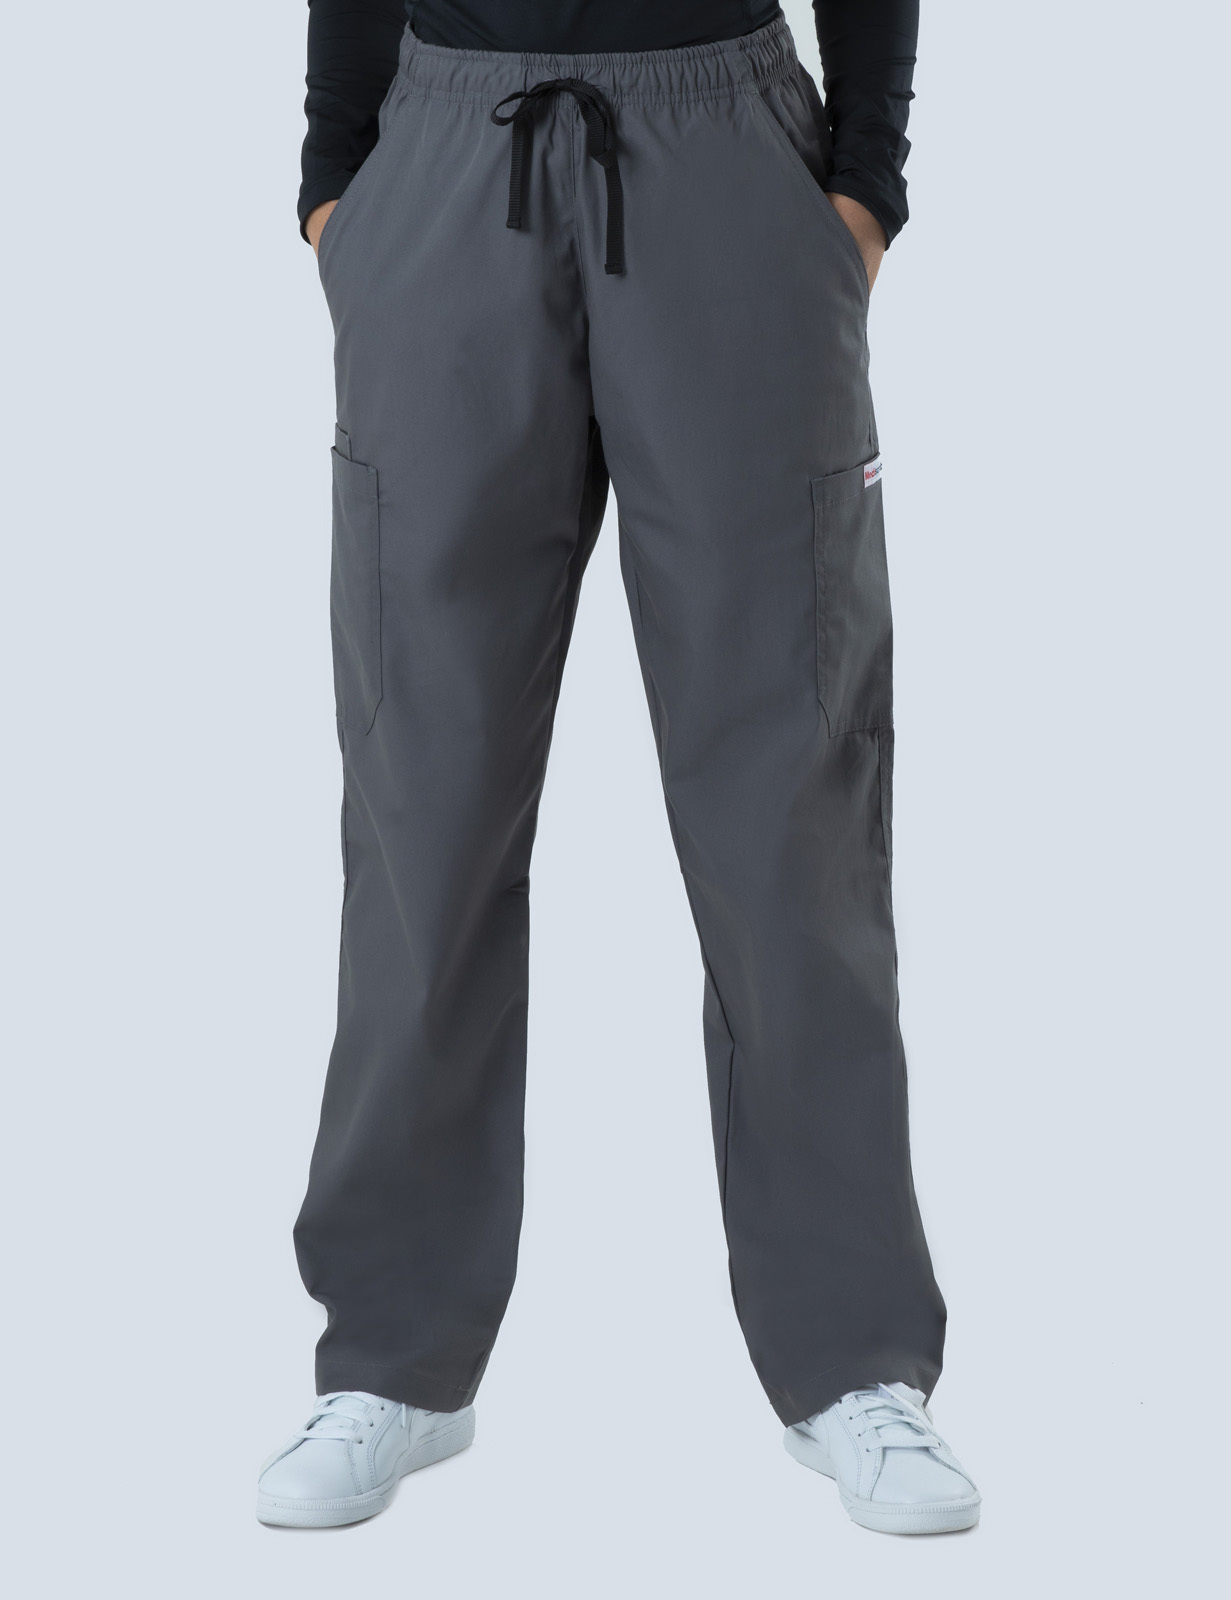 Melbourne Hospital - Wards CN (4 Pocket Scrub Top and Cargo Pants in Navy  incl Logos)